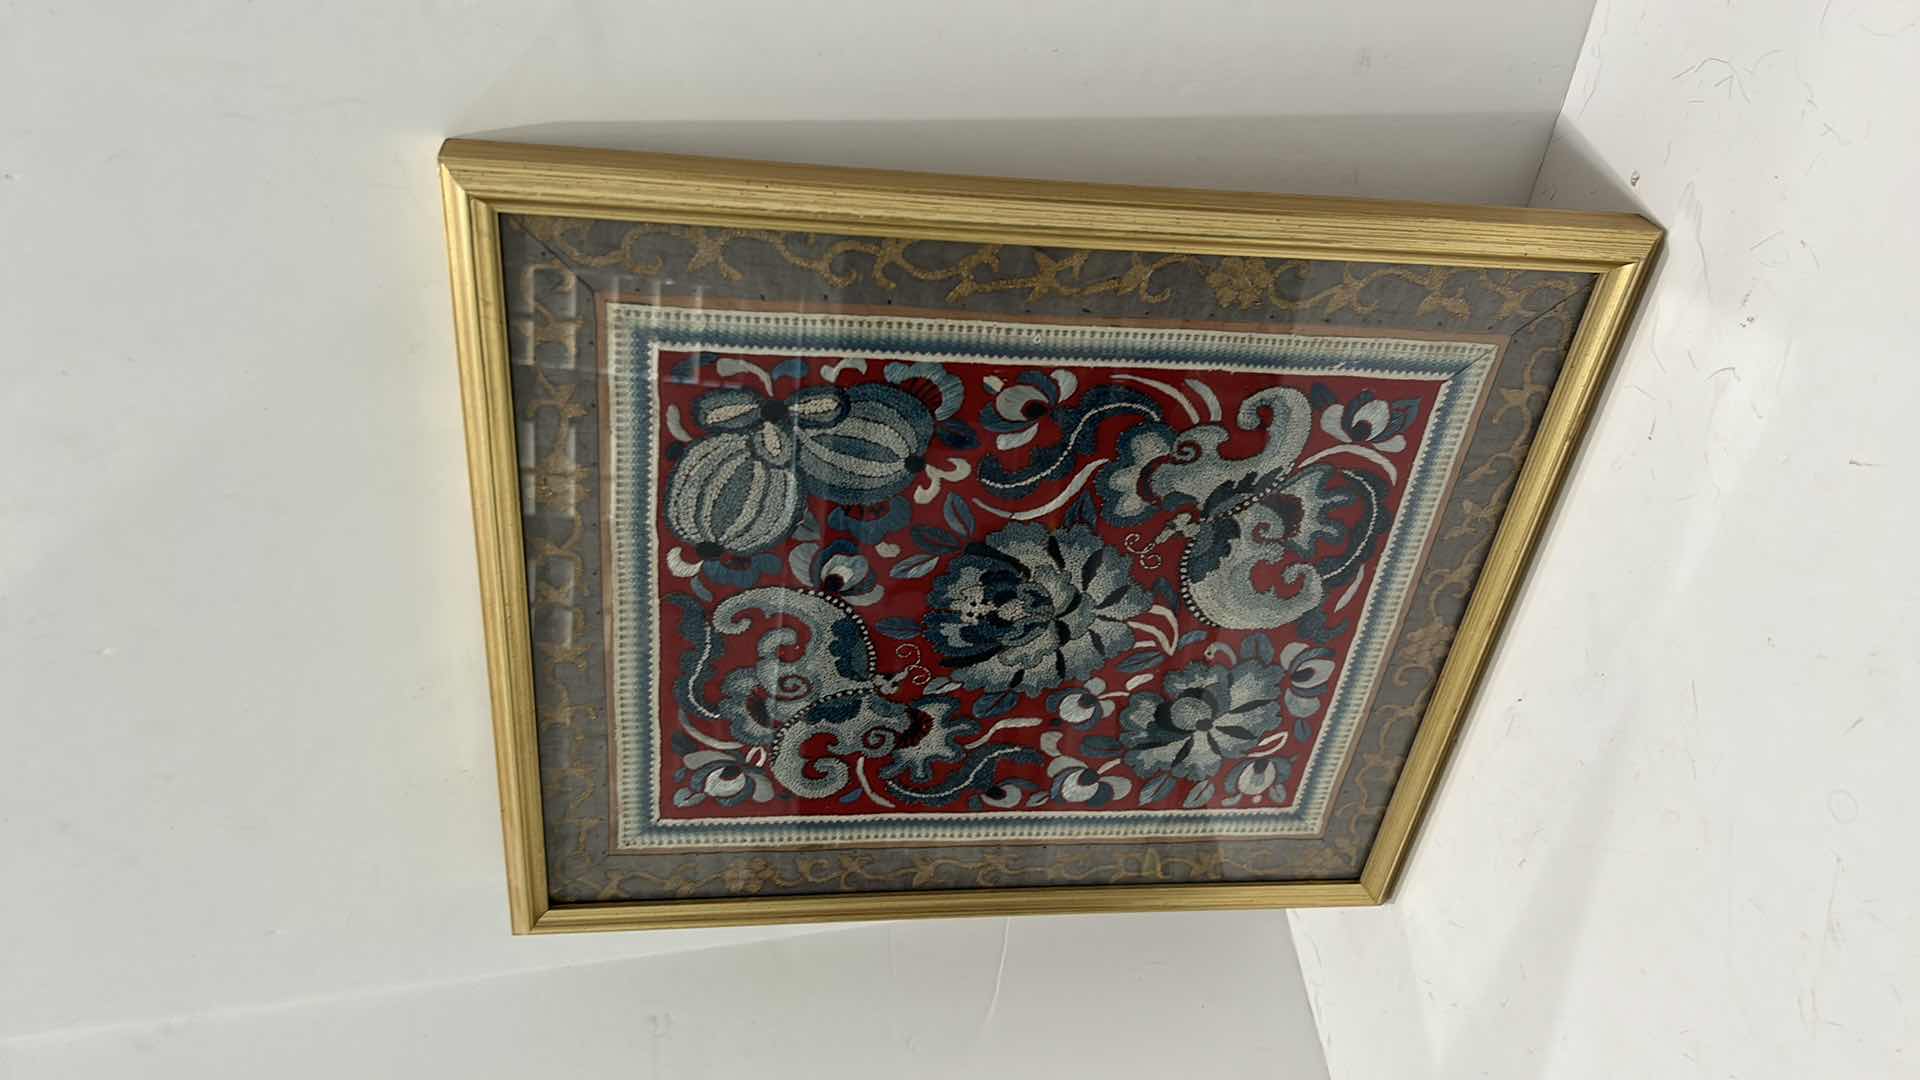 Photo 4 of ANTIQUE CHINESE TEXTILE FABRIC, SILK WITH SILK THREAD HAND EMBROIDERY ARTWORK FRAMED 14 1/2” x 17”